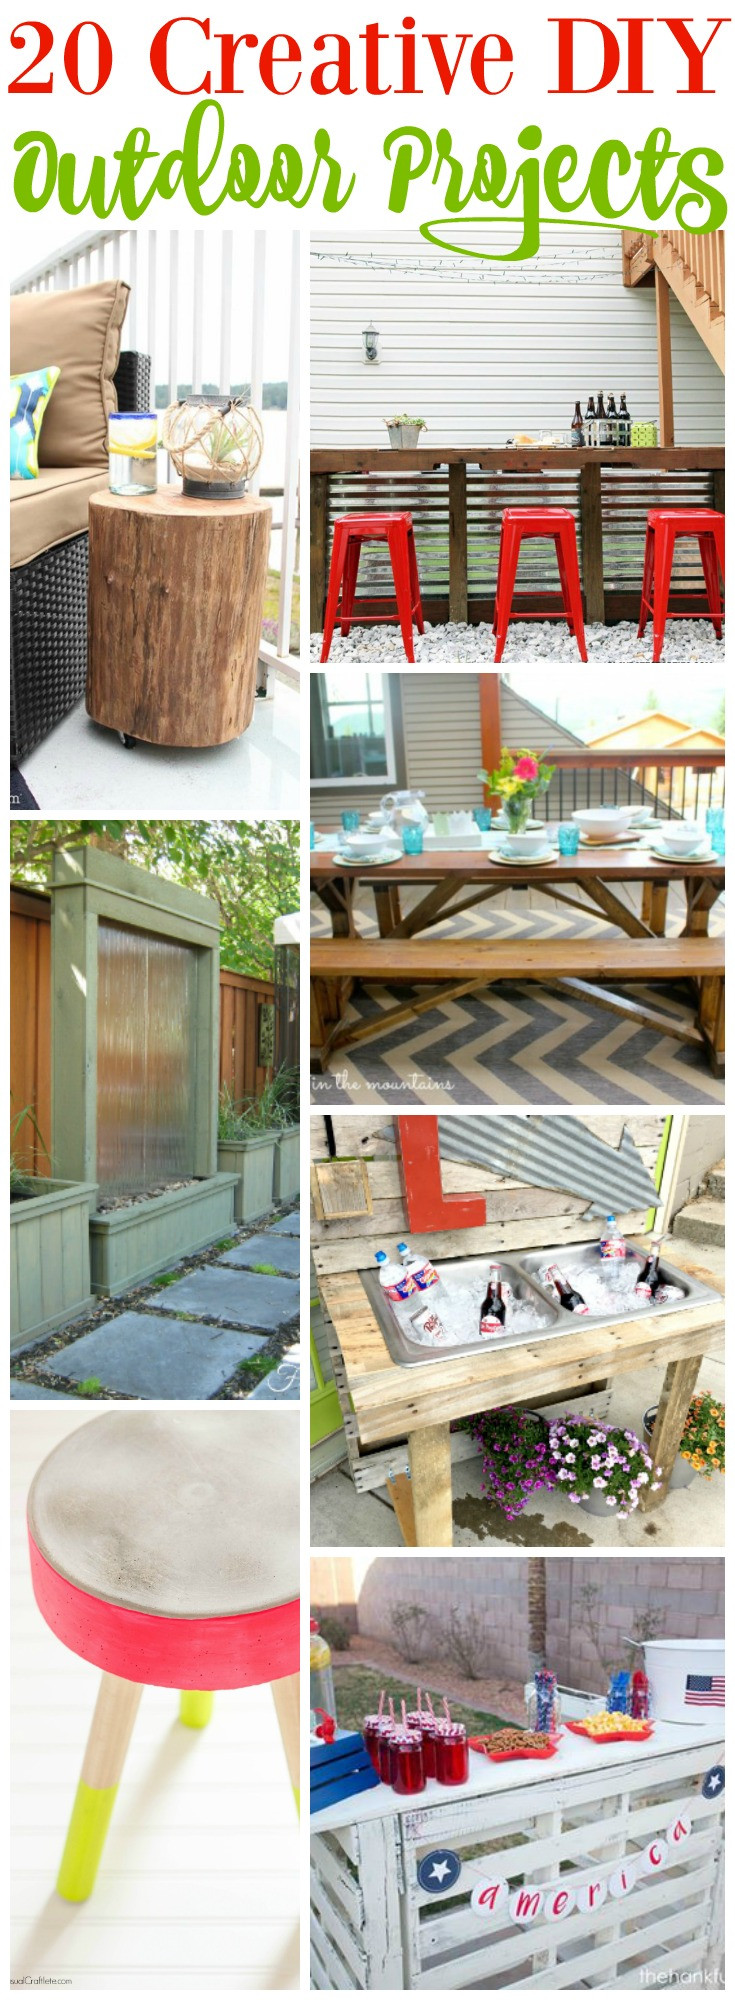 Outdoor DIY Projects
 20 Creative Outdoor DIY Projects